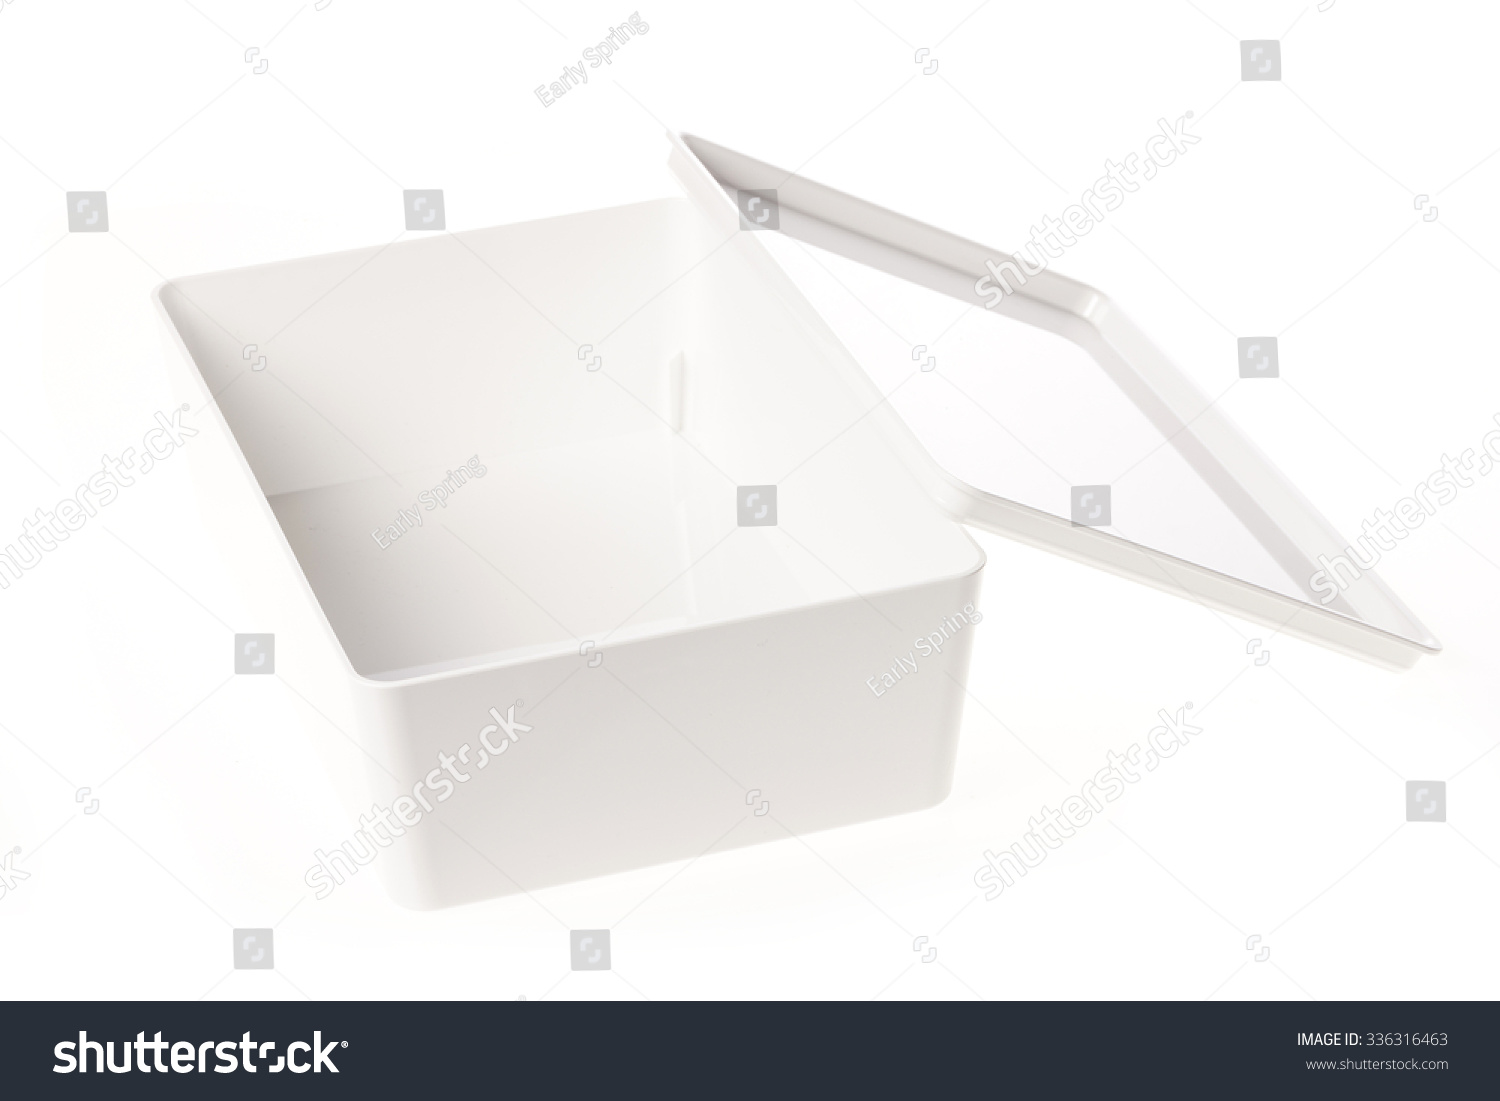 White Plastic Box Lid Emptyblink Container Stock Photo 336316463